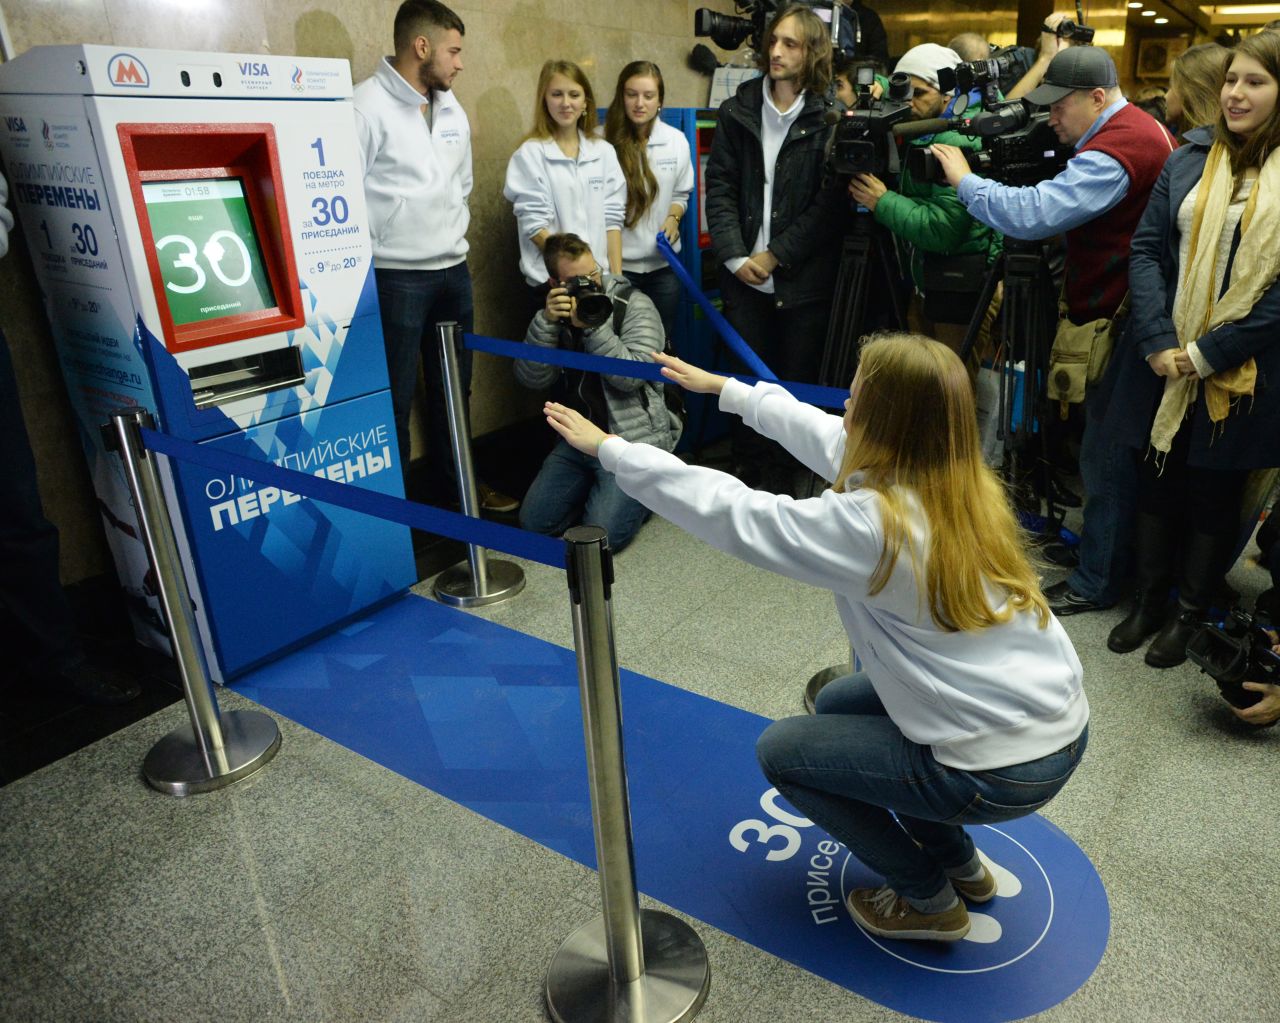 The fitness initiative is part of Russia's promotion of the upcoming Winter Olympics in Sochi.